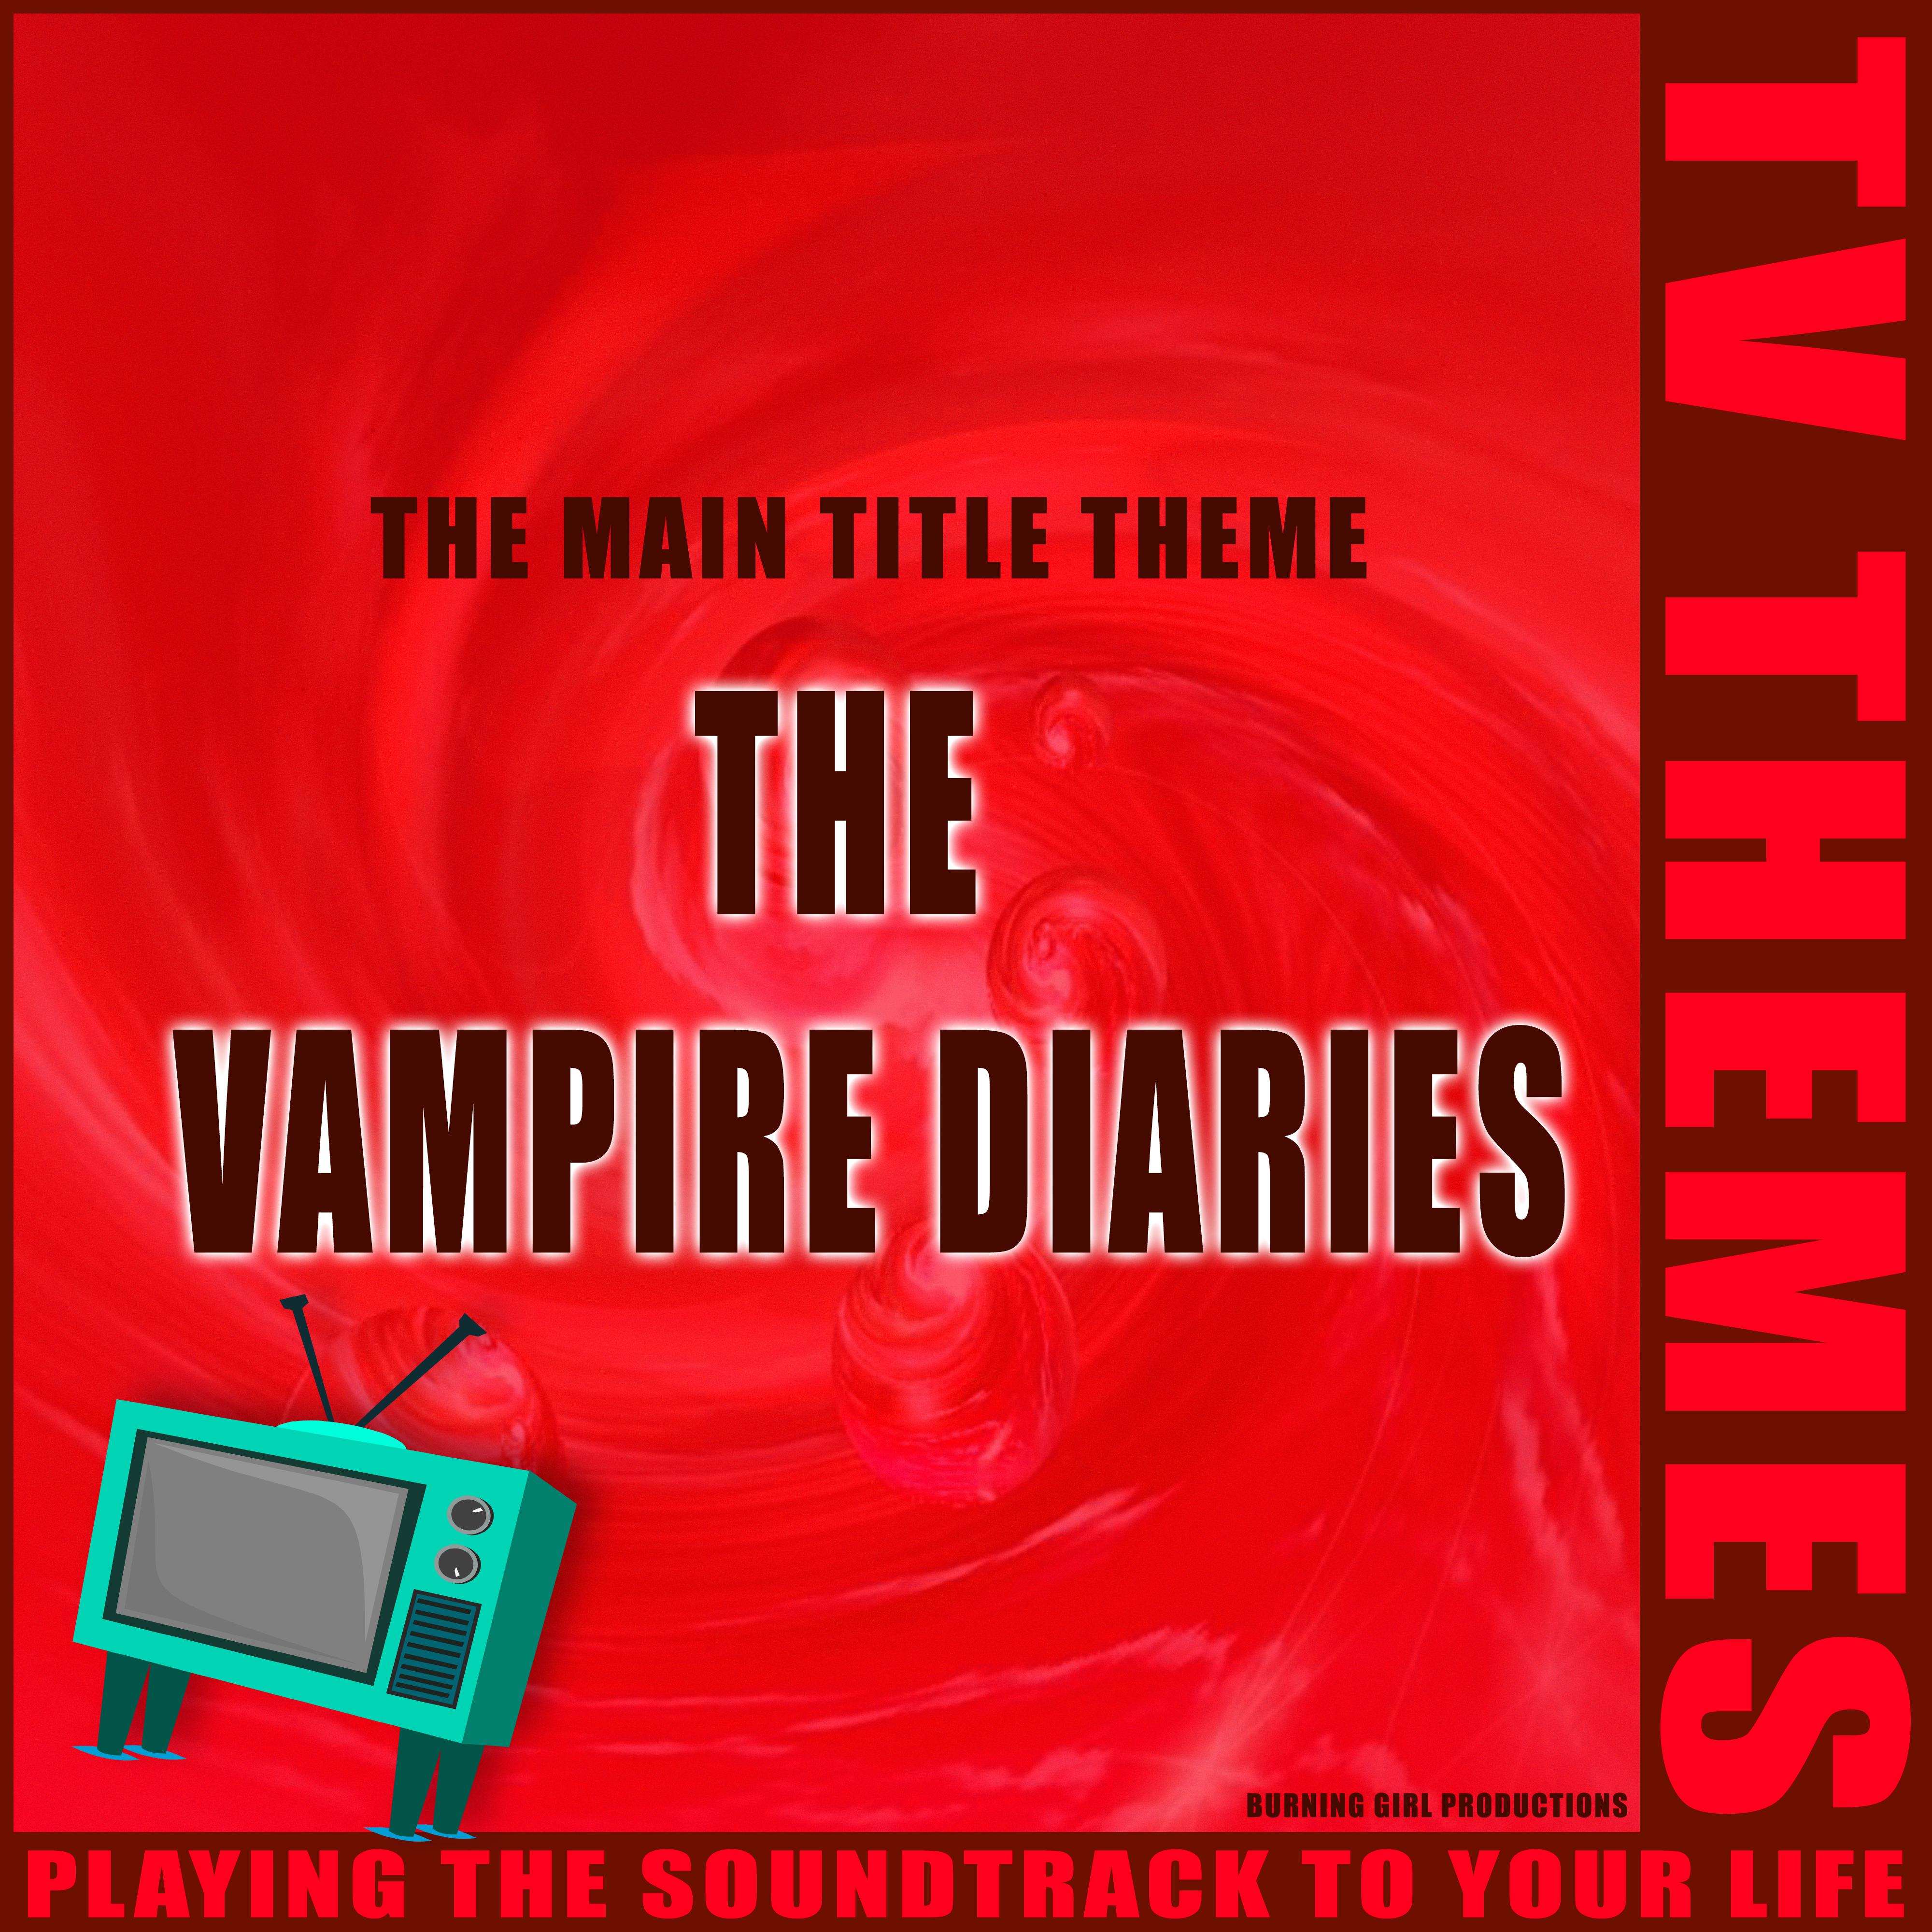 The Vampire Diaries - The Main Title Theme